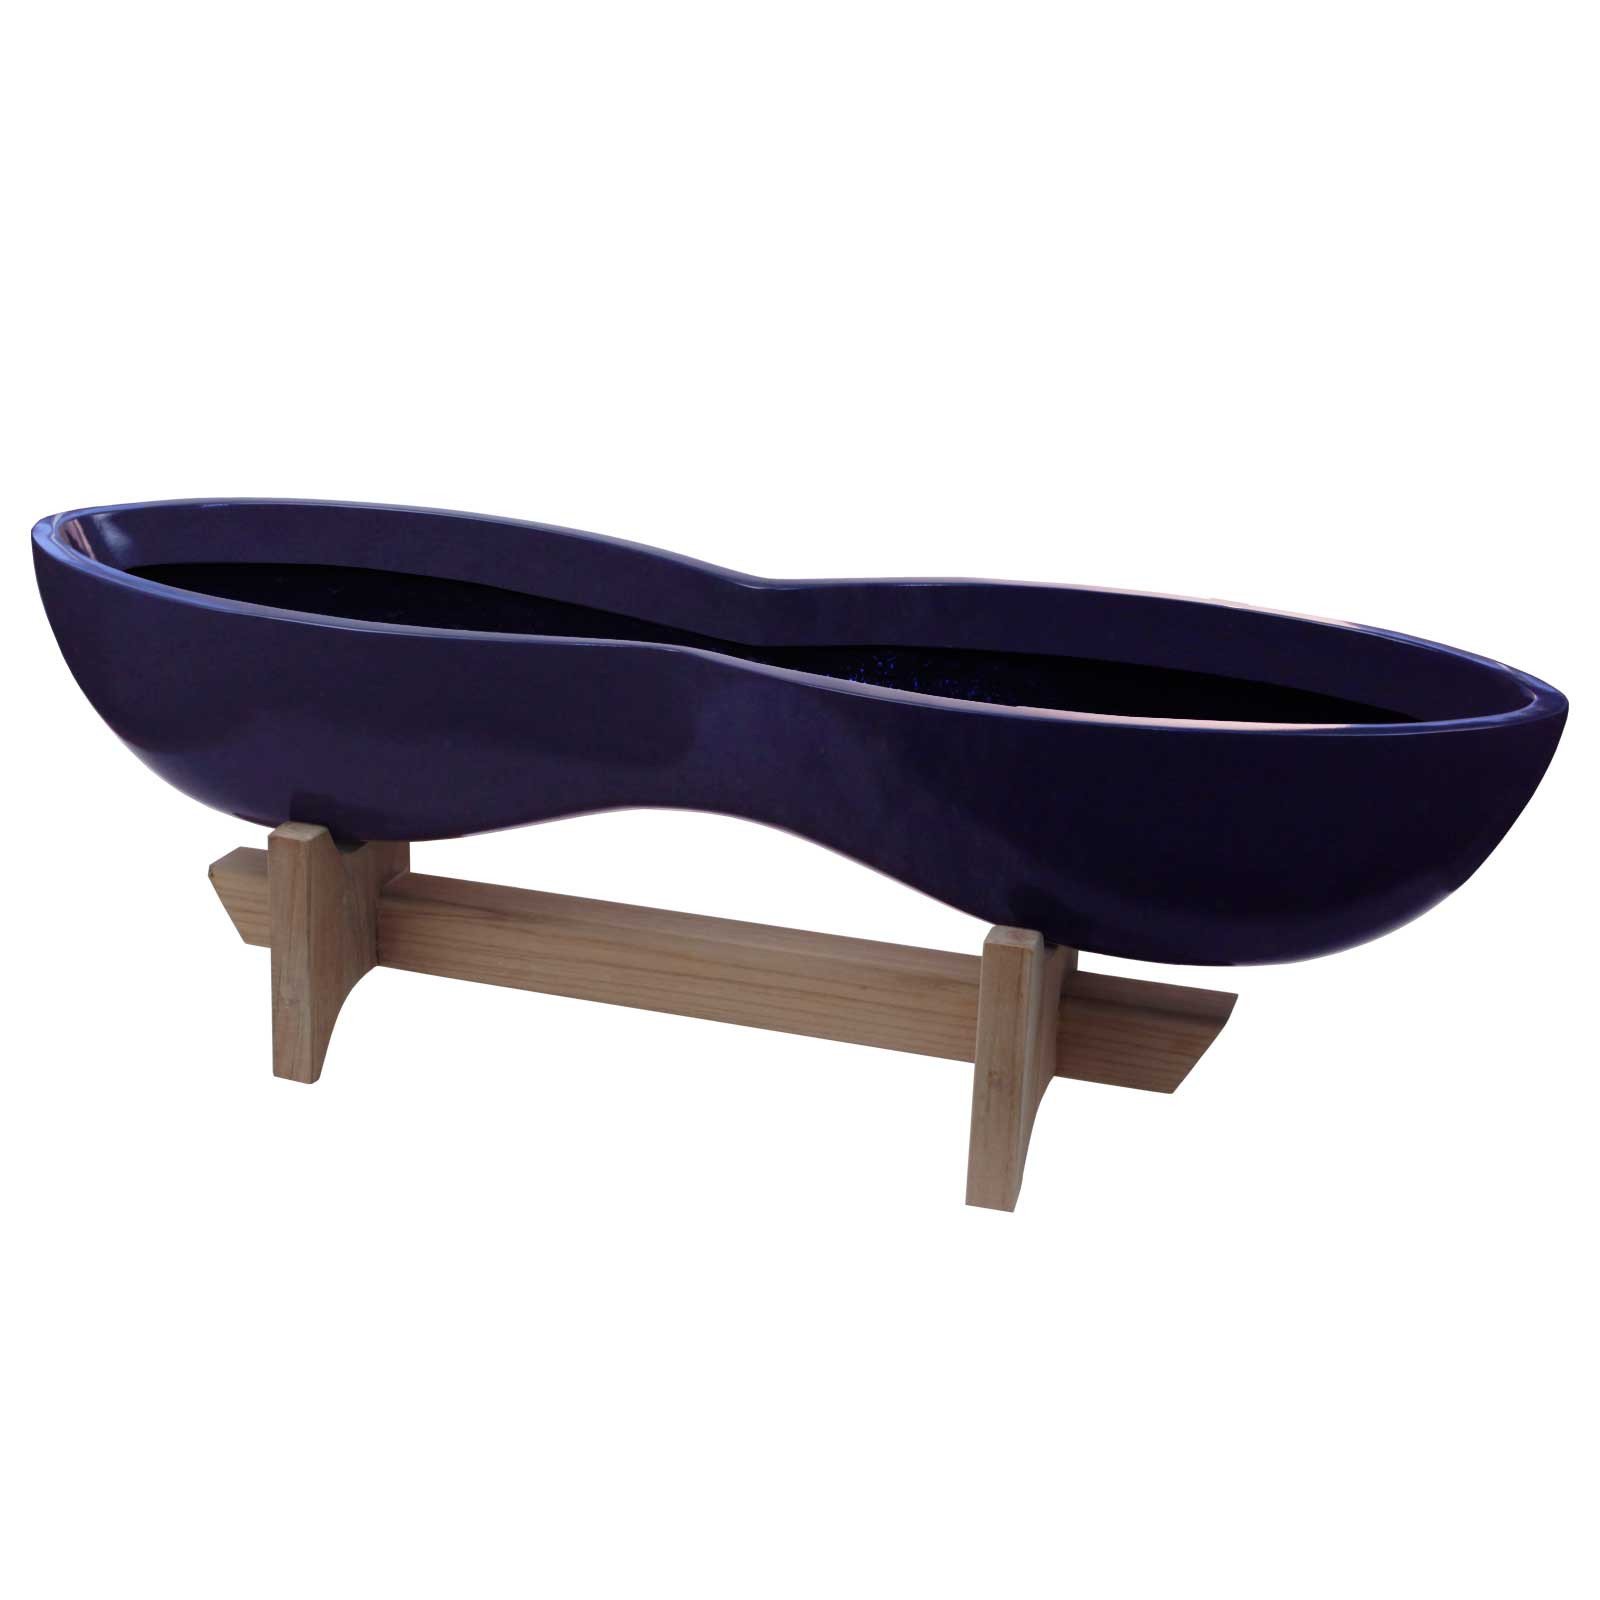 Timbrell Curved Tabletop Planter